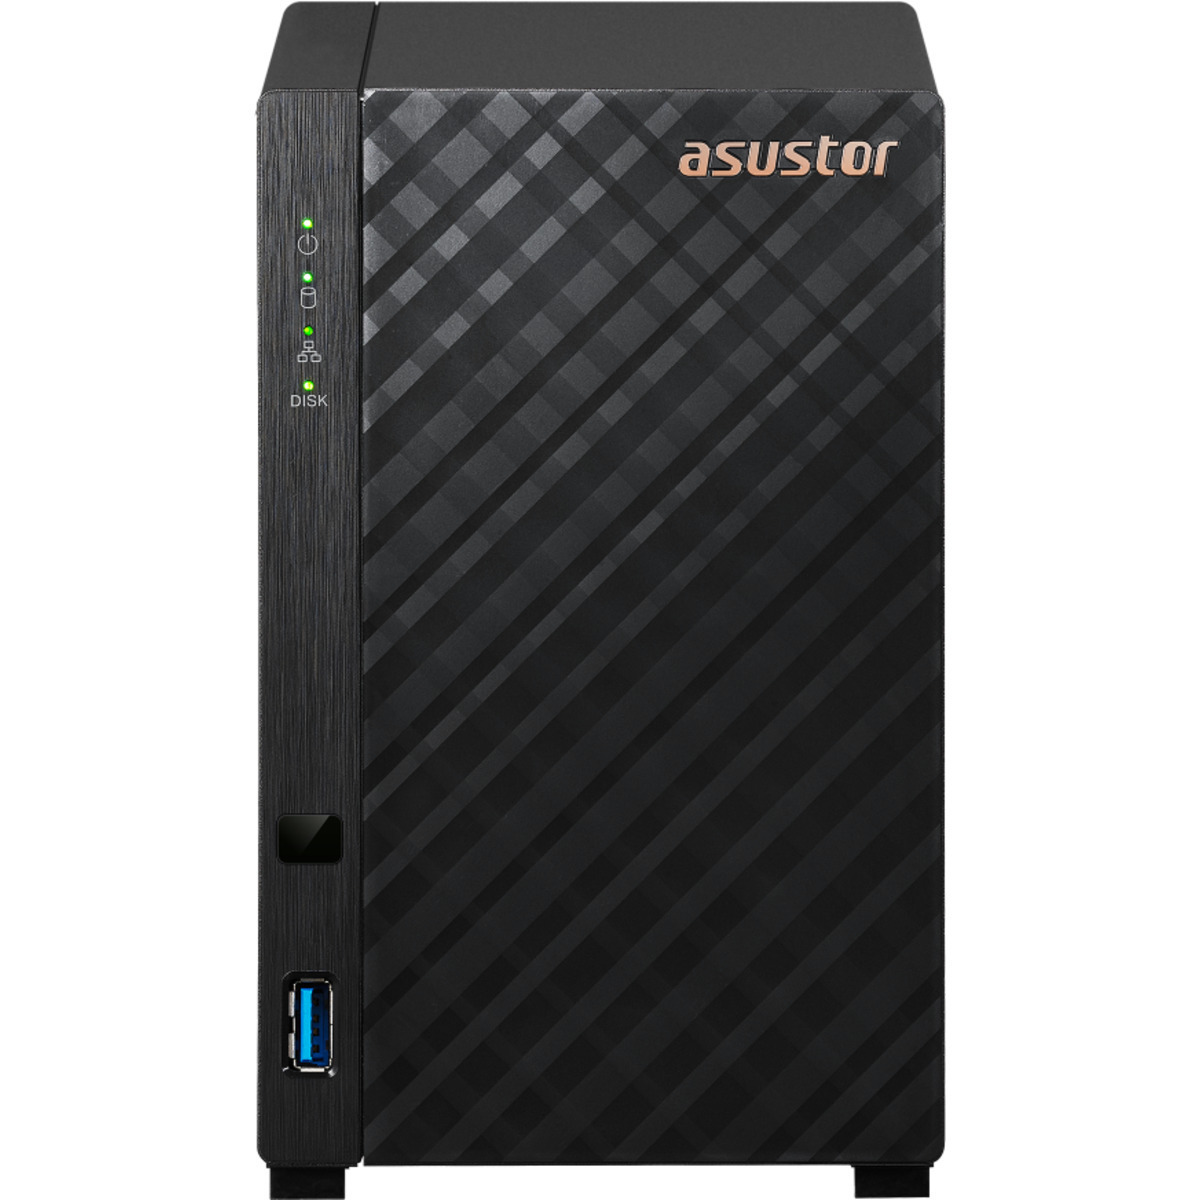 buy $372 ASUSTOR DRIVESTOR 2 AS1102T 2tb Desktop NAS - Network Attached Storage Device 1x2000gb Western Digital Gold WD2005FBYZ 3.5 7200rpm SATA 6Gb/s HDD ENTERPRISE Class Drives Installed - Burn-In Tested - nas headquarters buy network attached storage server device das new raid-5 free shipping usa DRIVESTOR 2 AS1102T